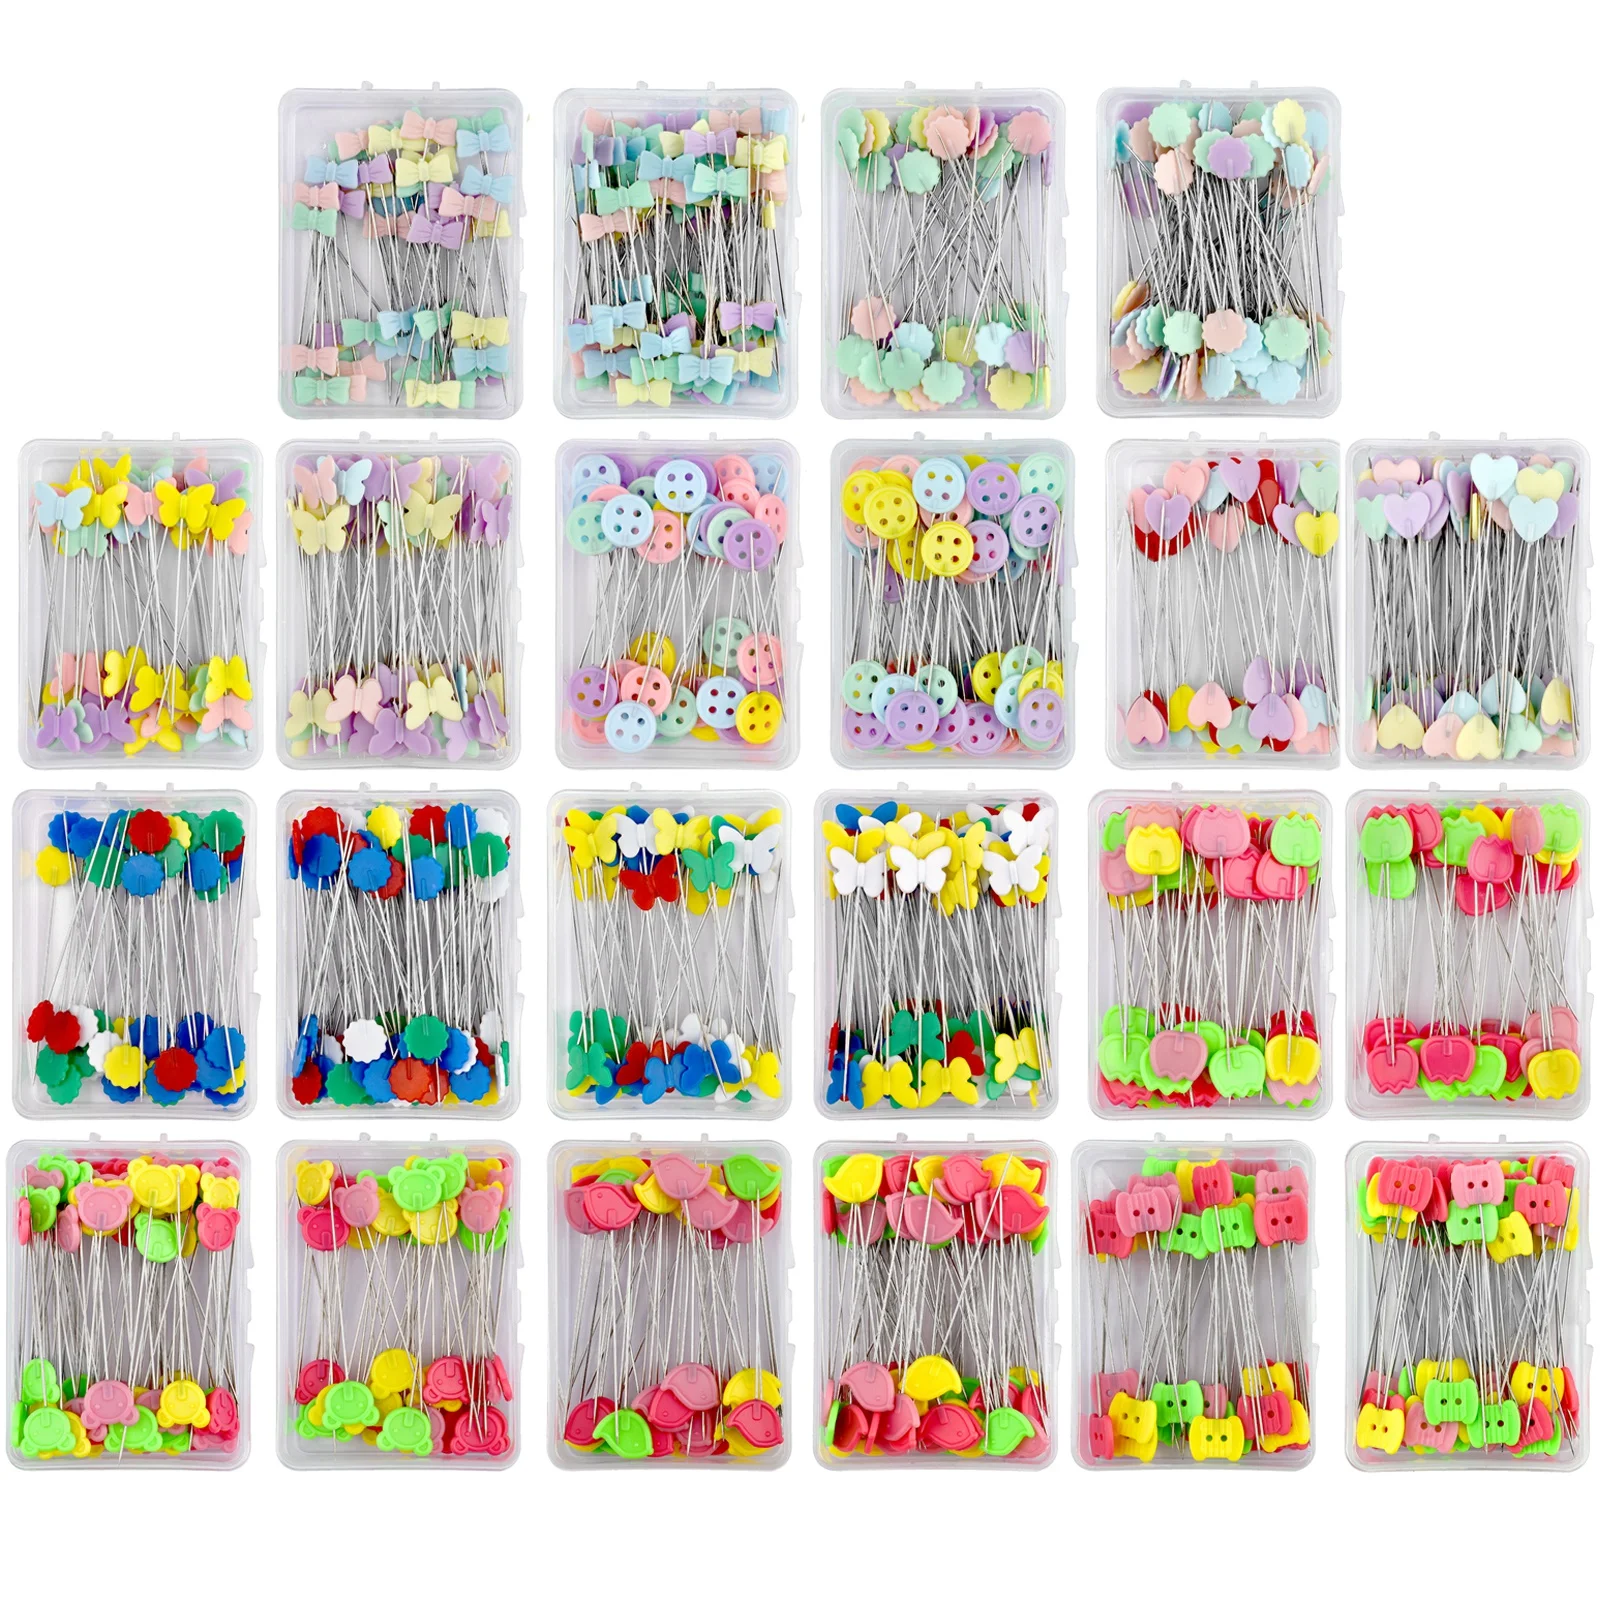 New Dressmaking Pins Embroidery Patchwork Tools Fixed Pin Button Pin Patchwork Pin For Sewing Positioning And DIY 50pcs/100pcs